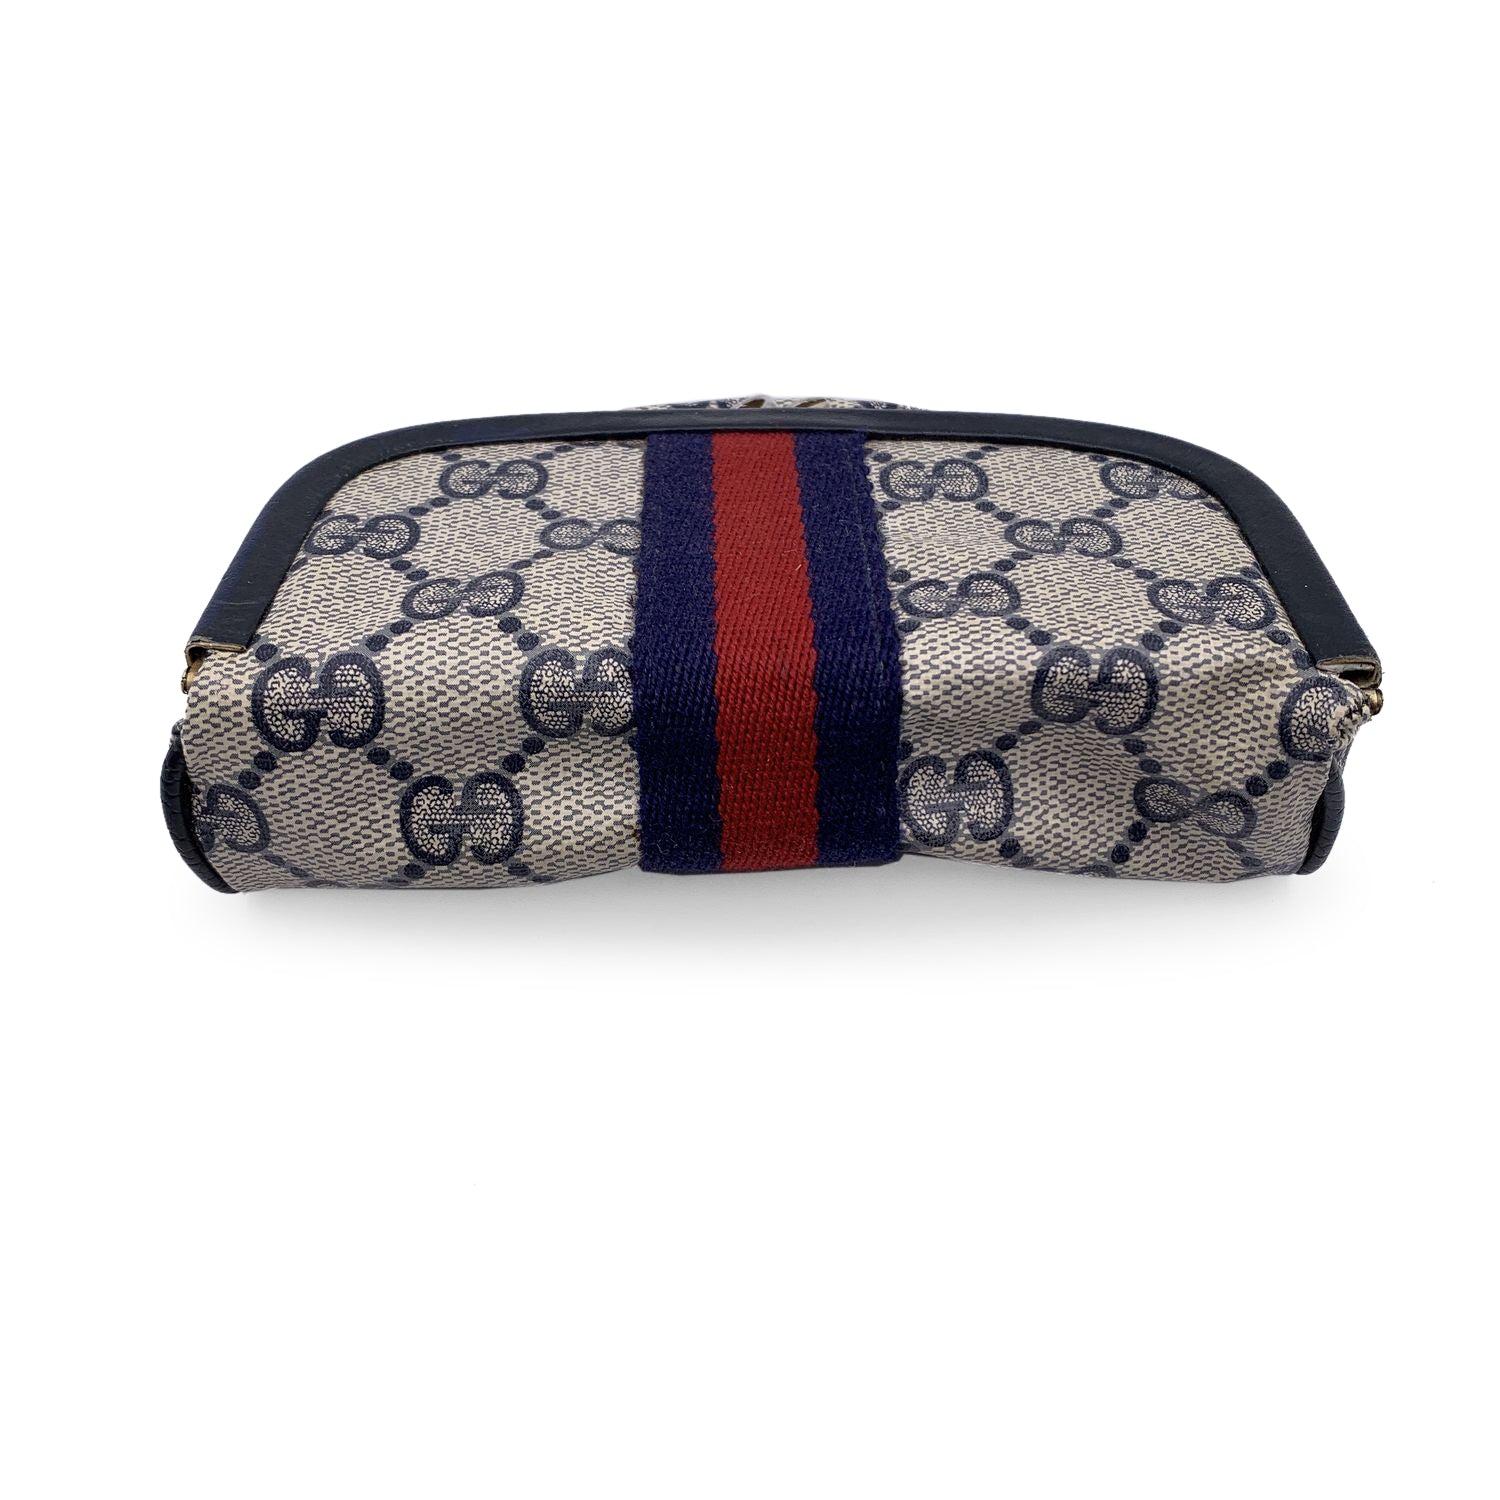 Vintage Gucci blue monogram canvas cosmetic case with stripes. Blue monogram canvas with genuine leather trim. Mirror inside. Blue/Red/blue stripes around the bag. Kiss lock closure. Blue waterproof lining. 'GUCCI Accessory collection - made in